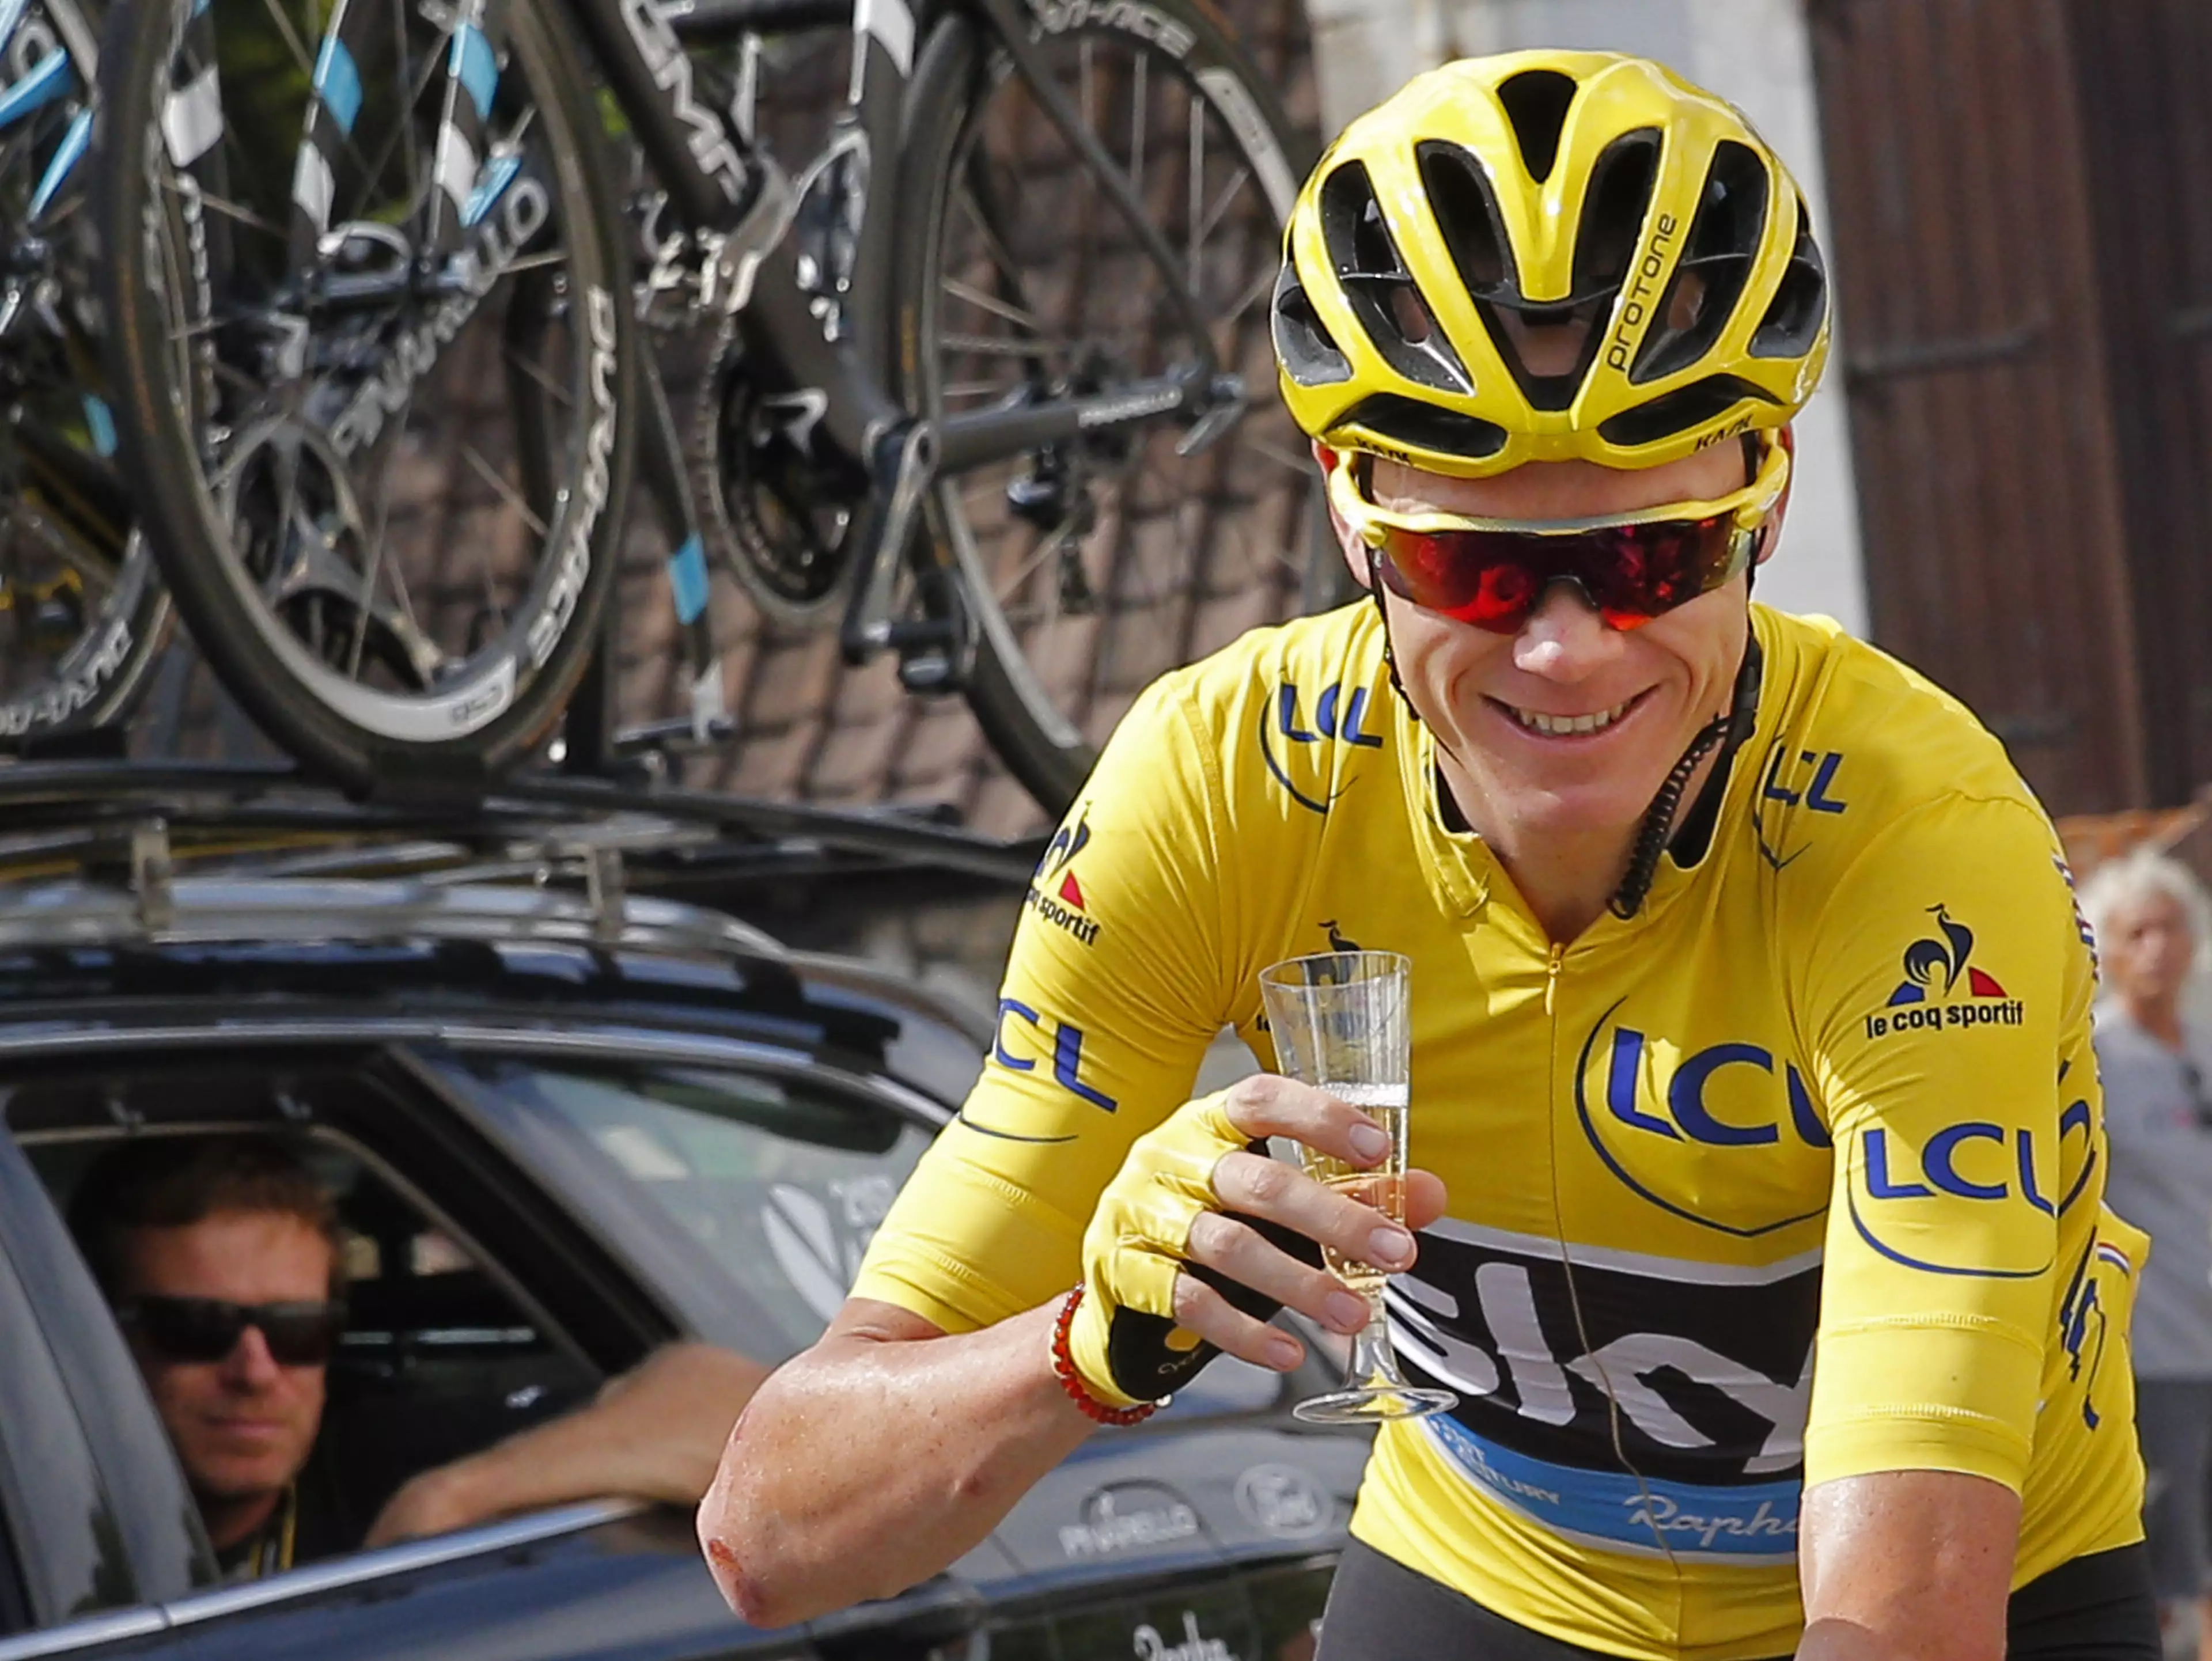 Tour De France Winner Chris Froome Has His Say On TUEs